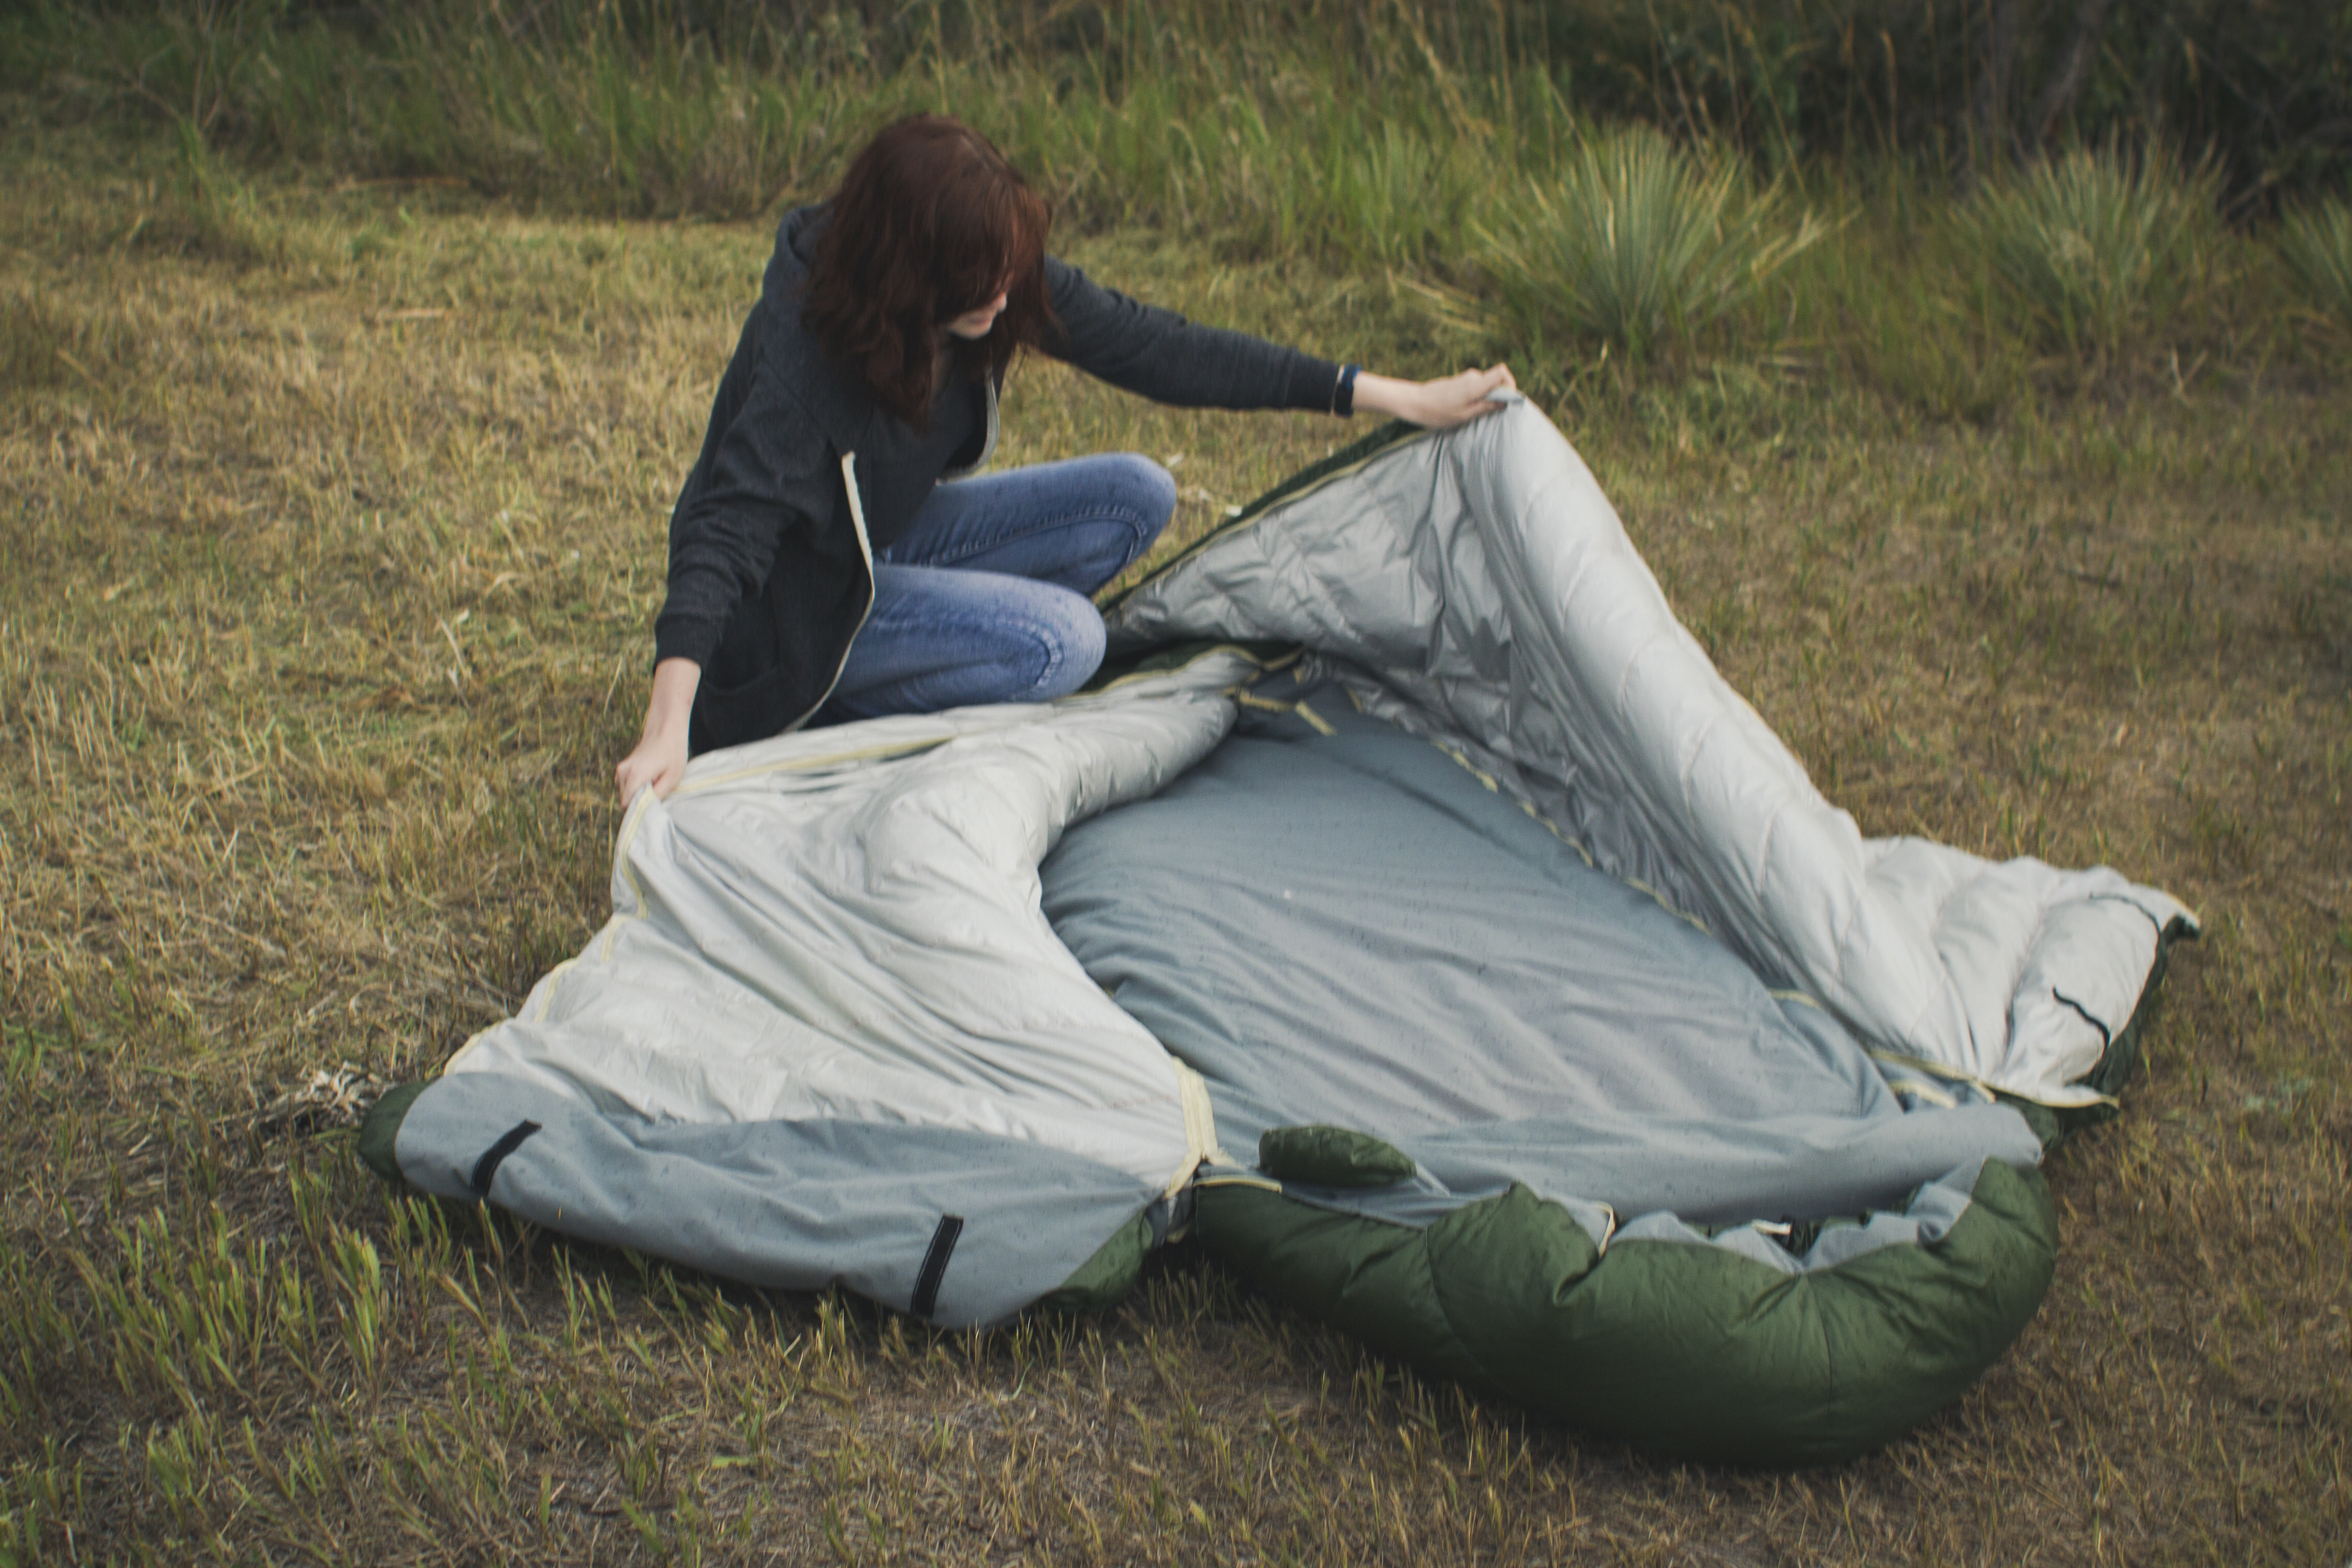 What to Look for in a Sleeping Bag